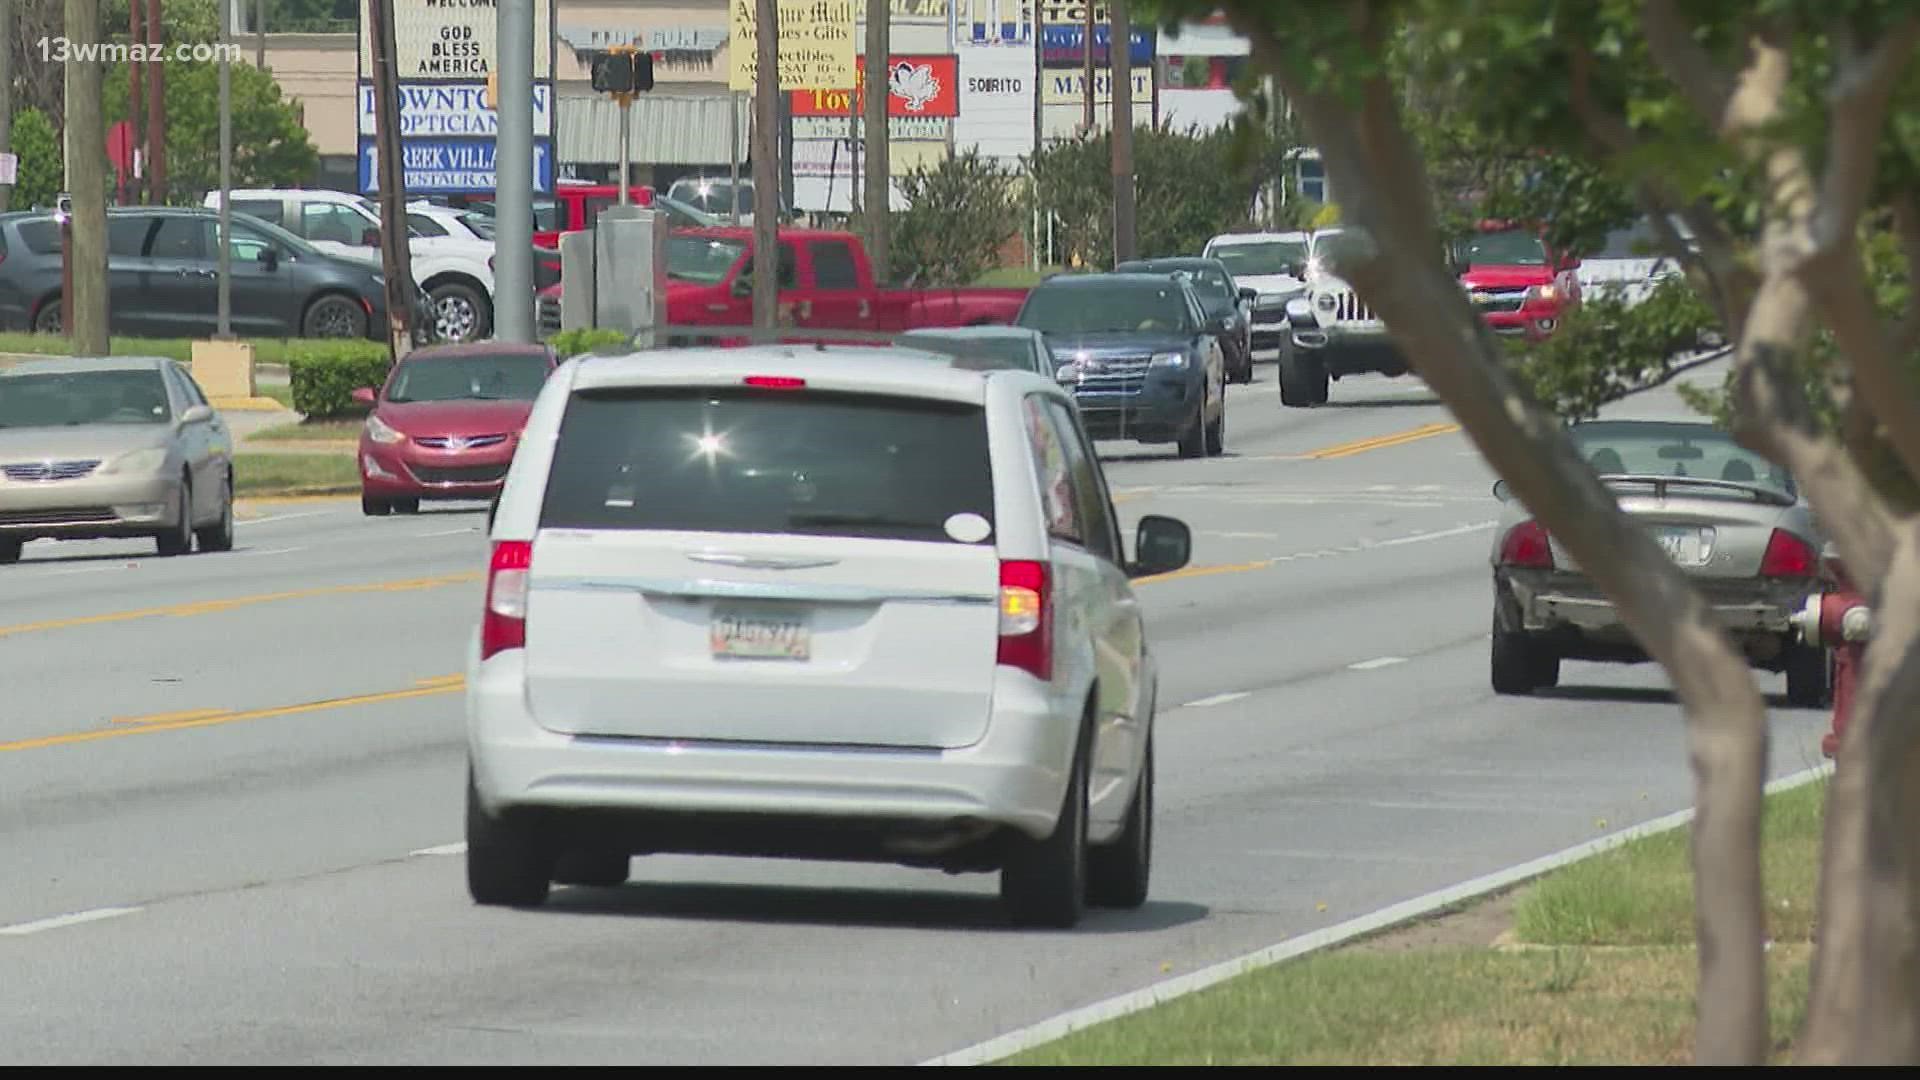 A Houston County man is asking mayor and council for access to public transportation in Warner Robins.